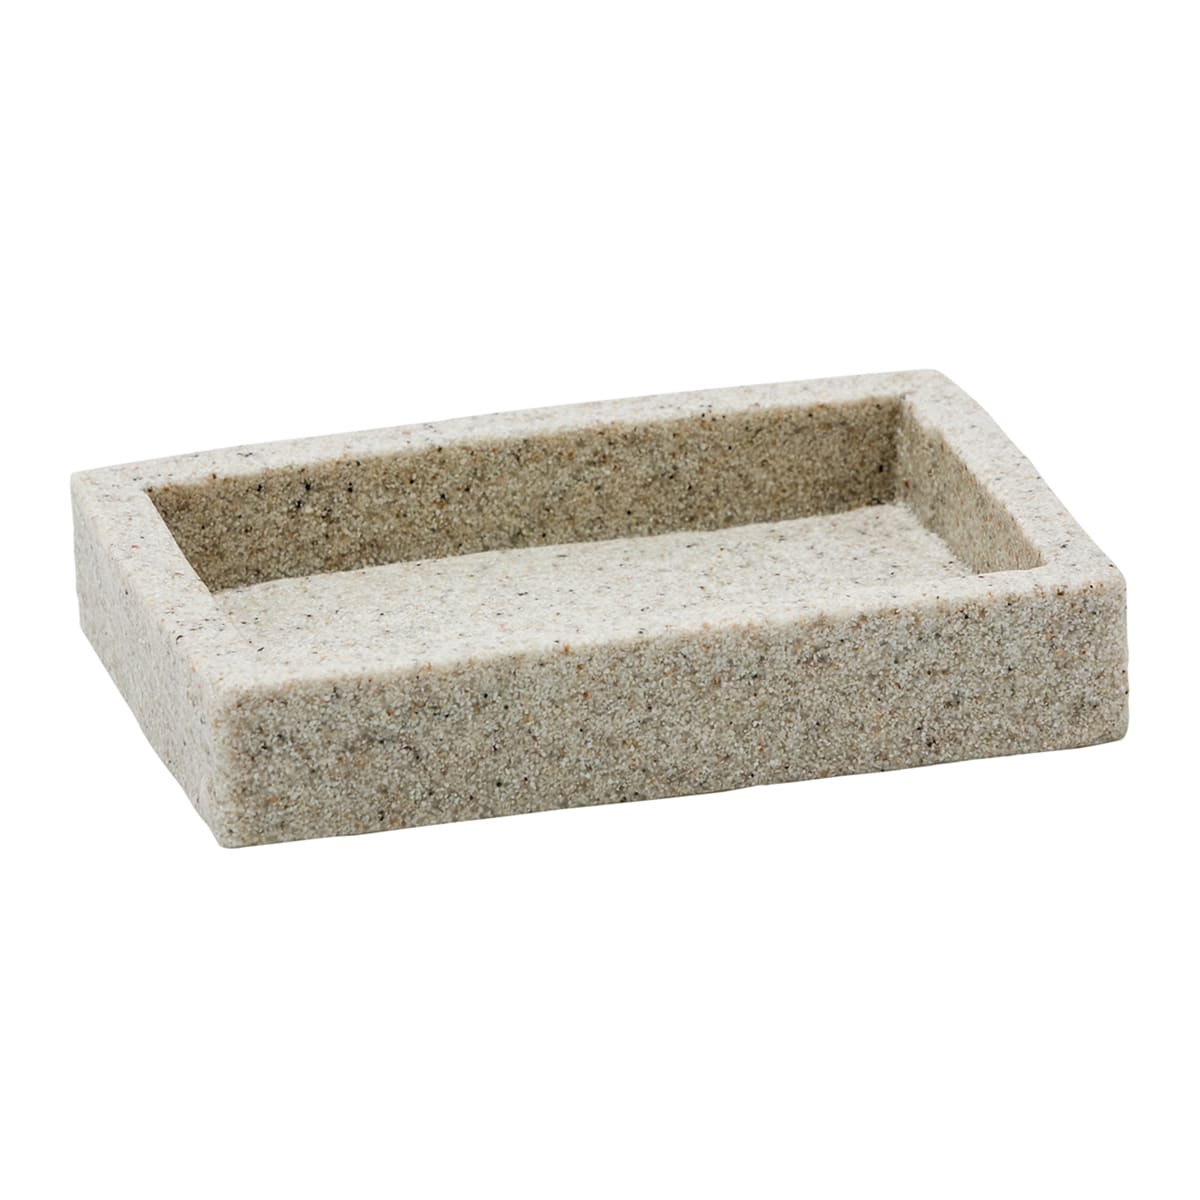 SYL SOAP DISH SAND EFFECT